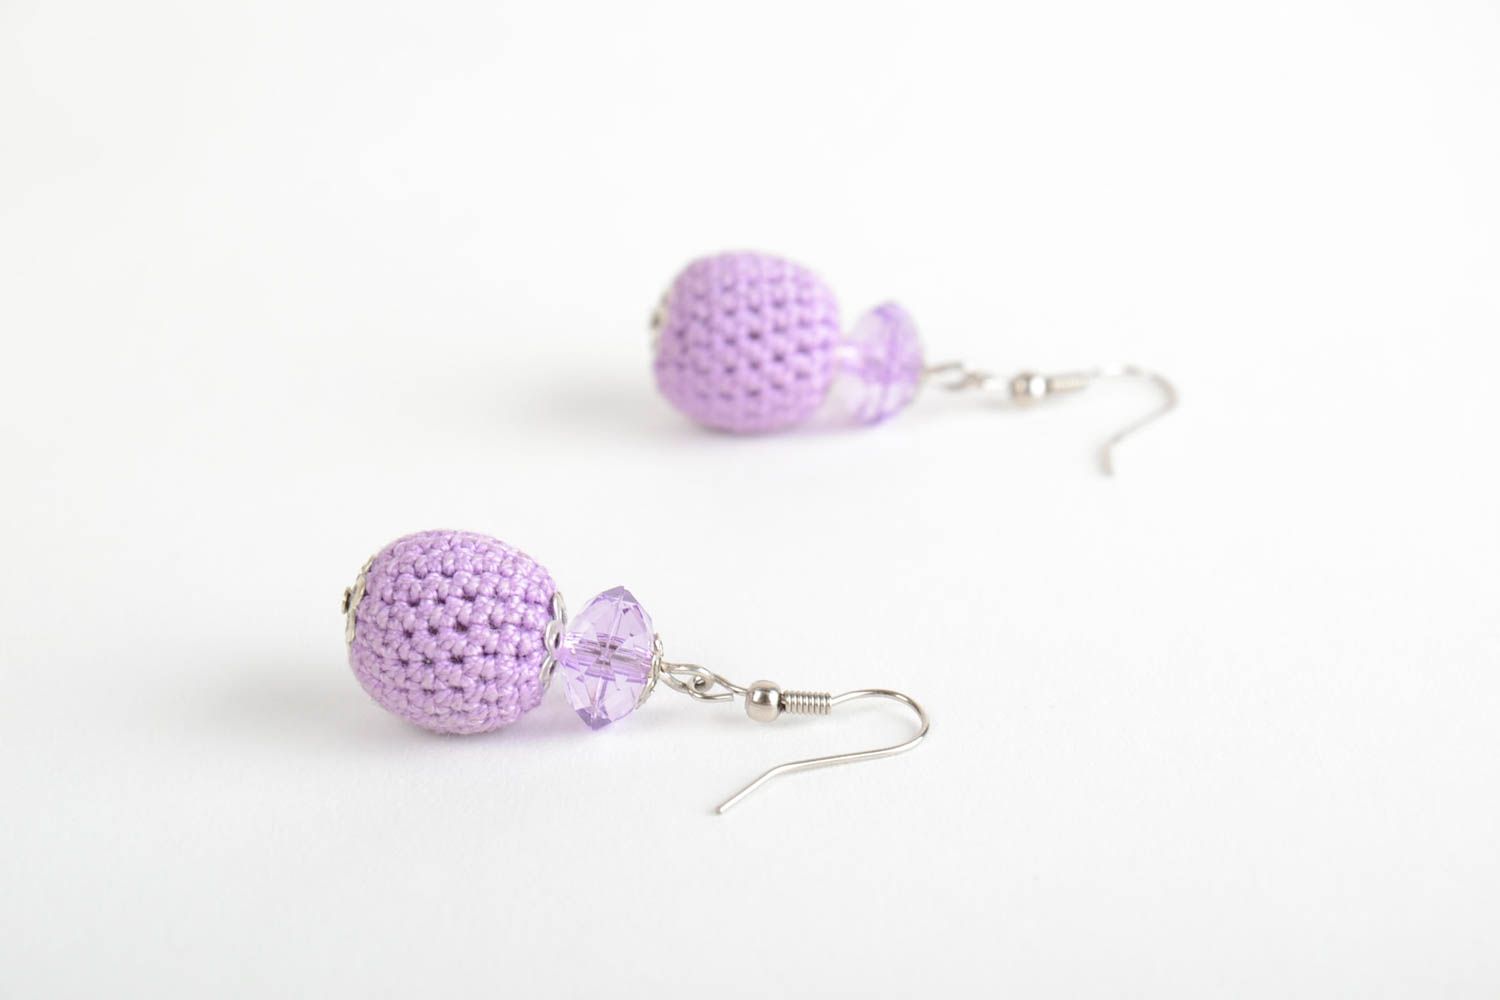 Handmade wooden bead earrings crocheted over with violet cotton threads photo 5